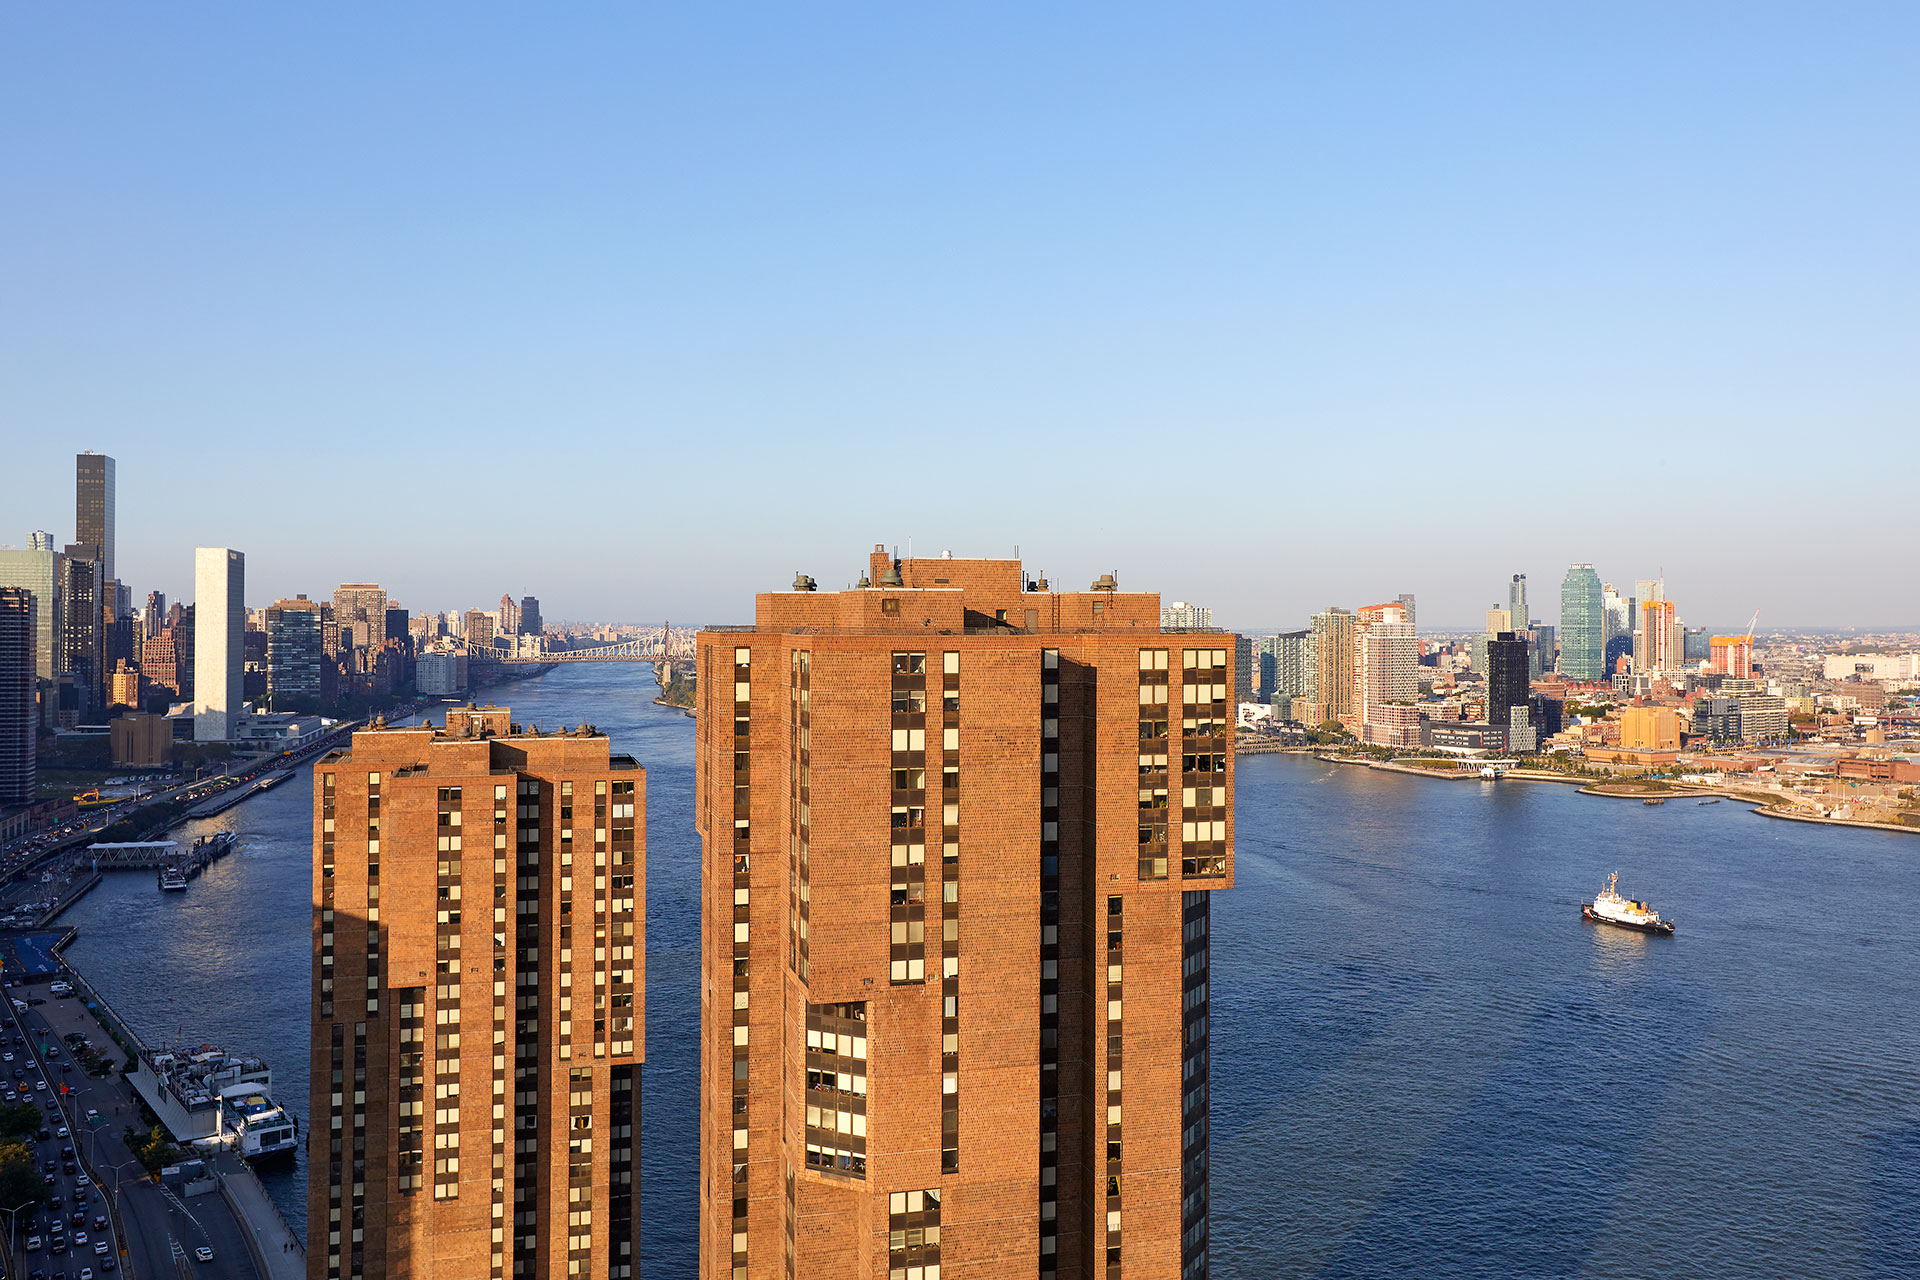 Apartment Complexes In NYC - Waterside Plaza - Kips Bay